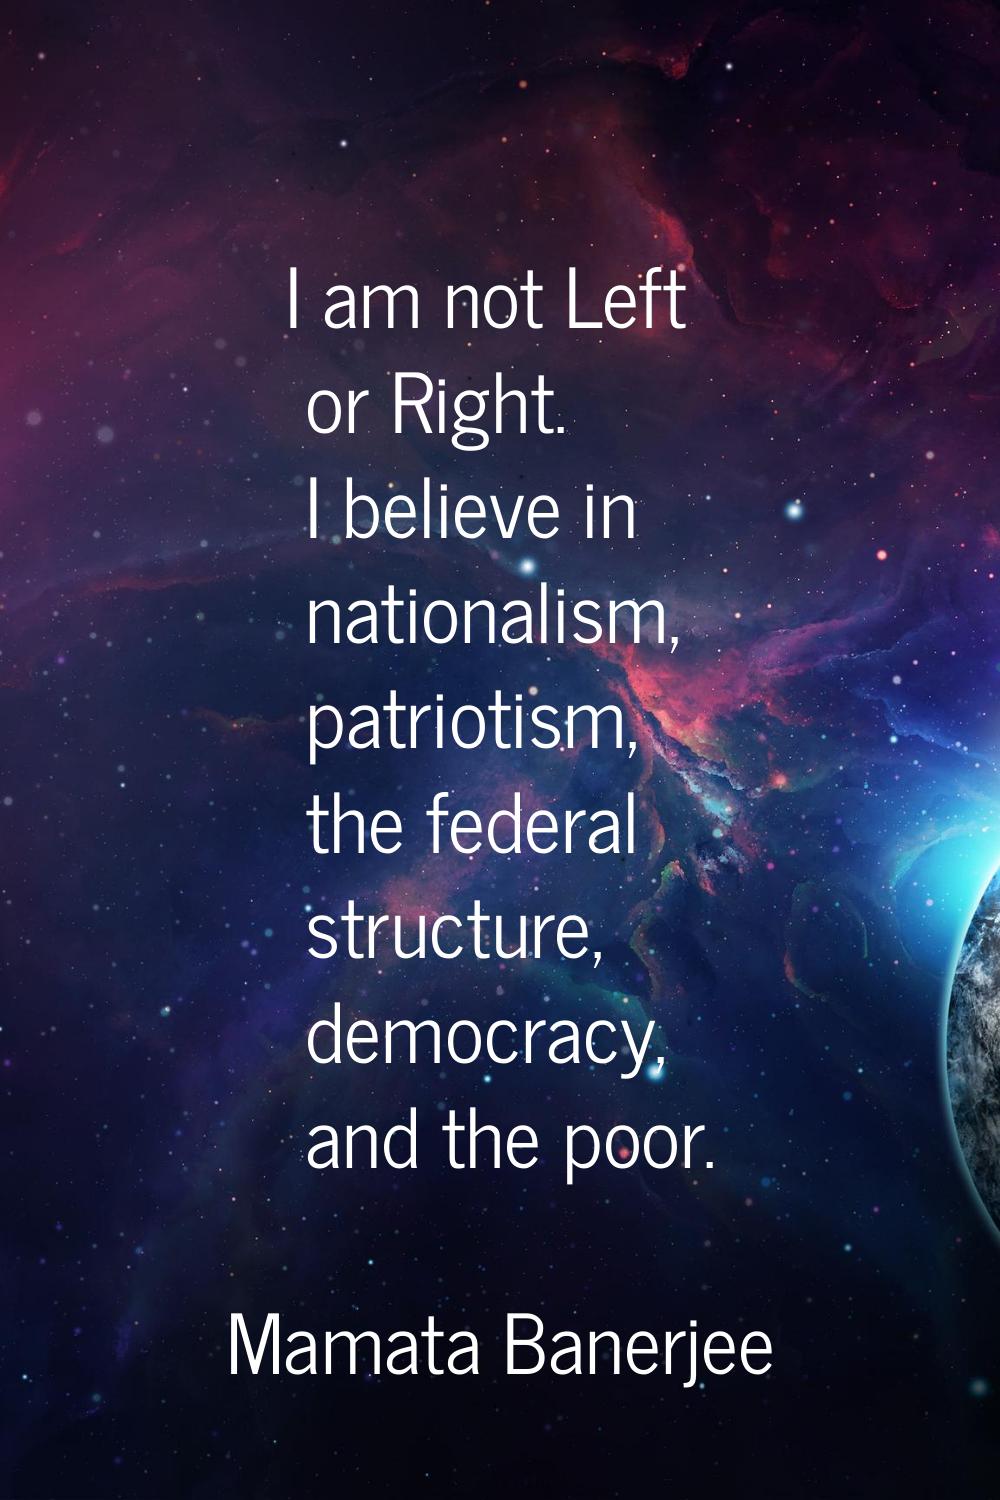 I am not Left or Right. I believe in nationalism, patriotism, the federal structure, democracy, and